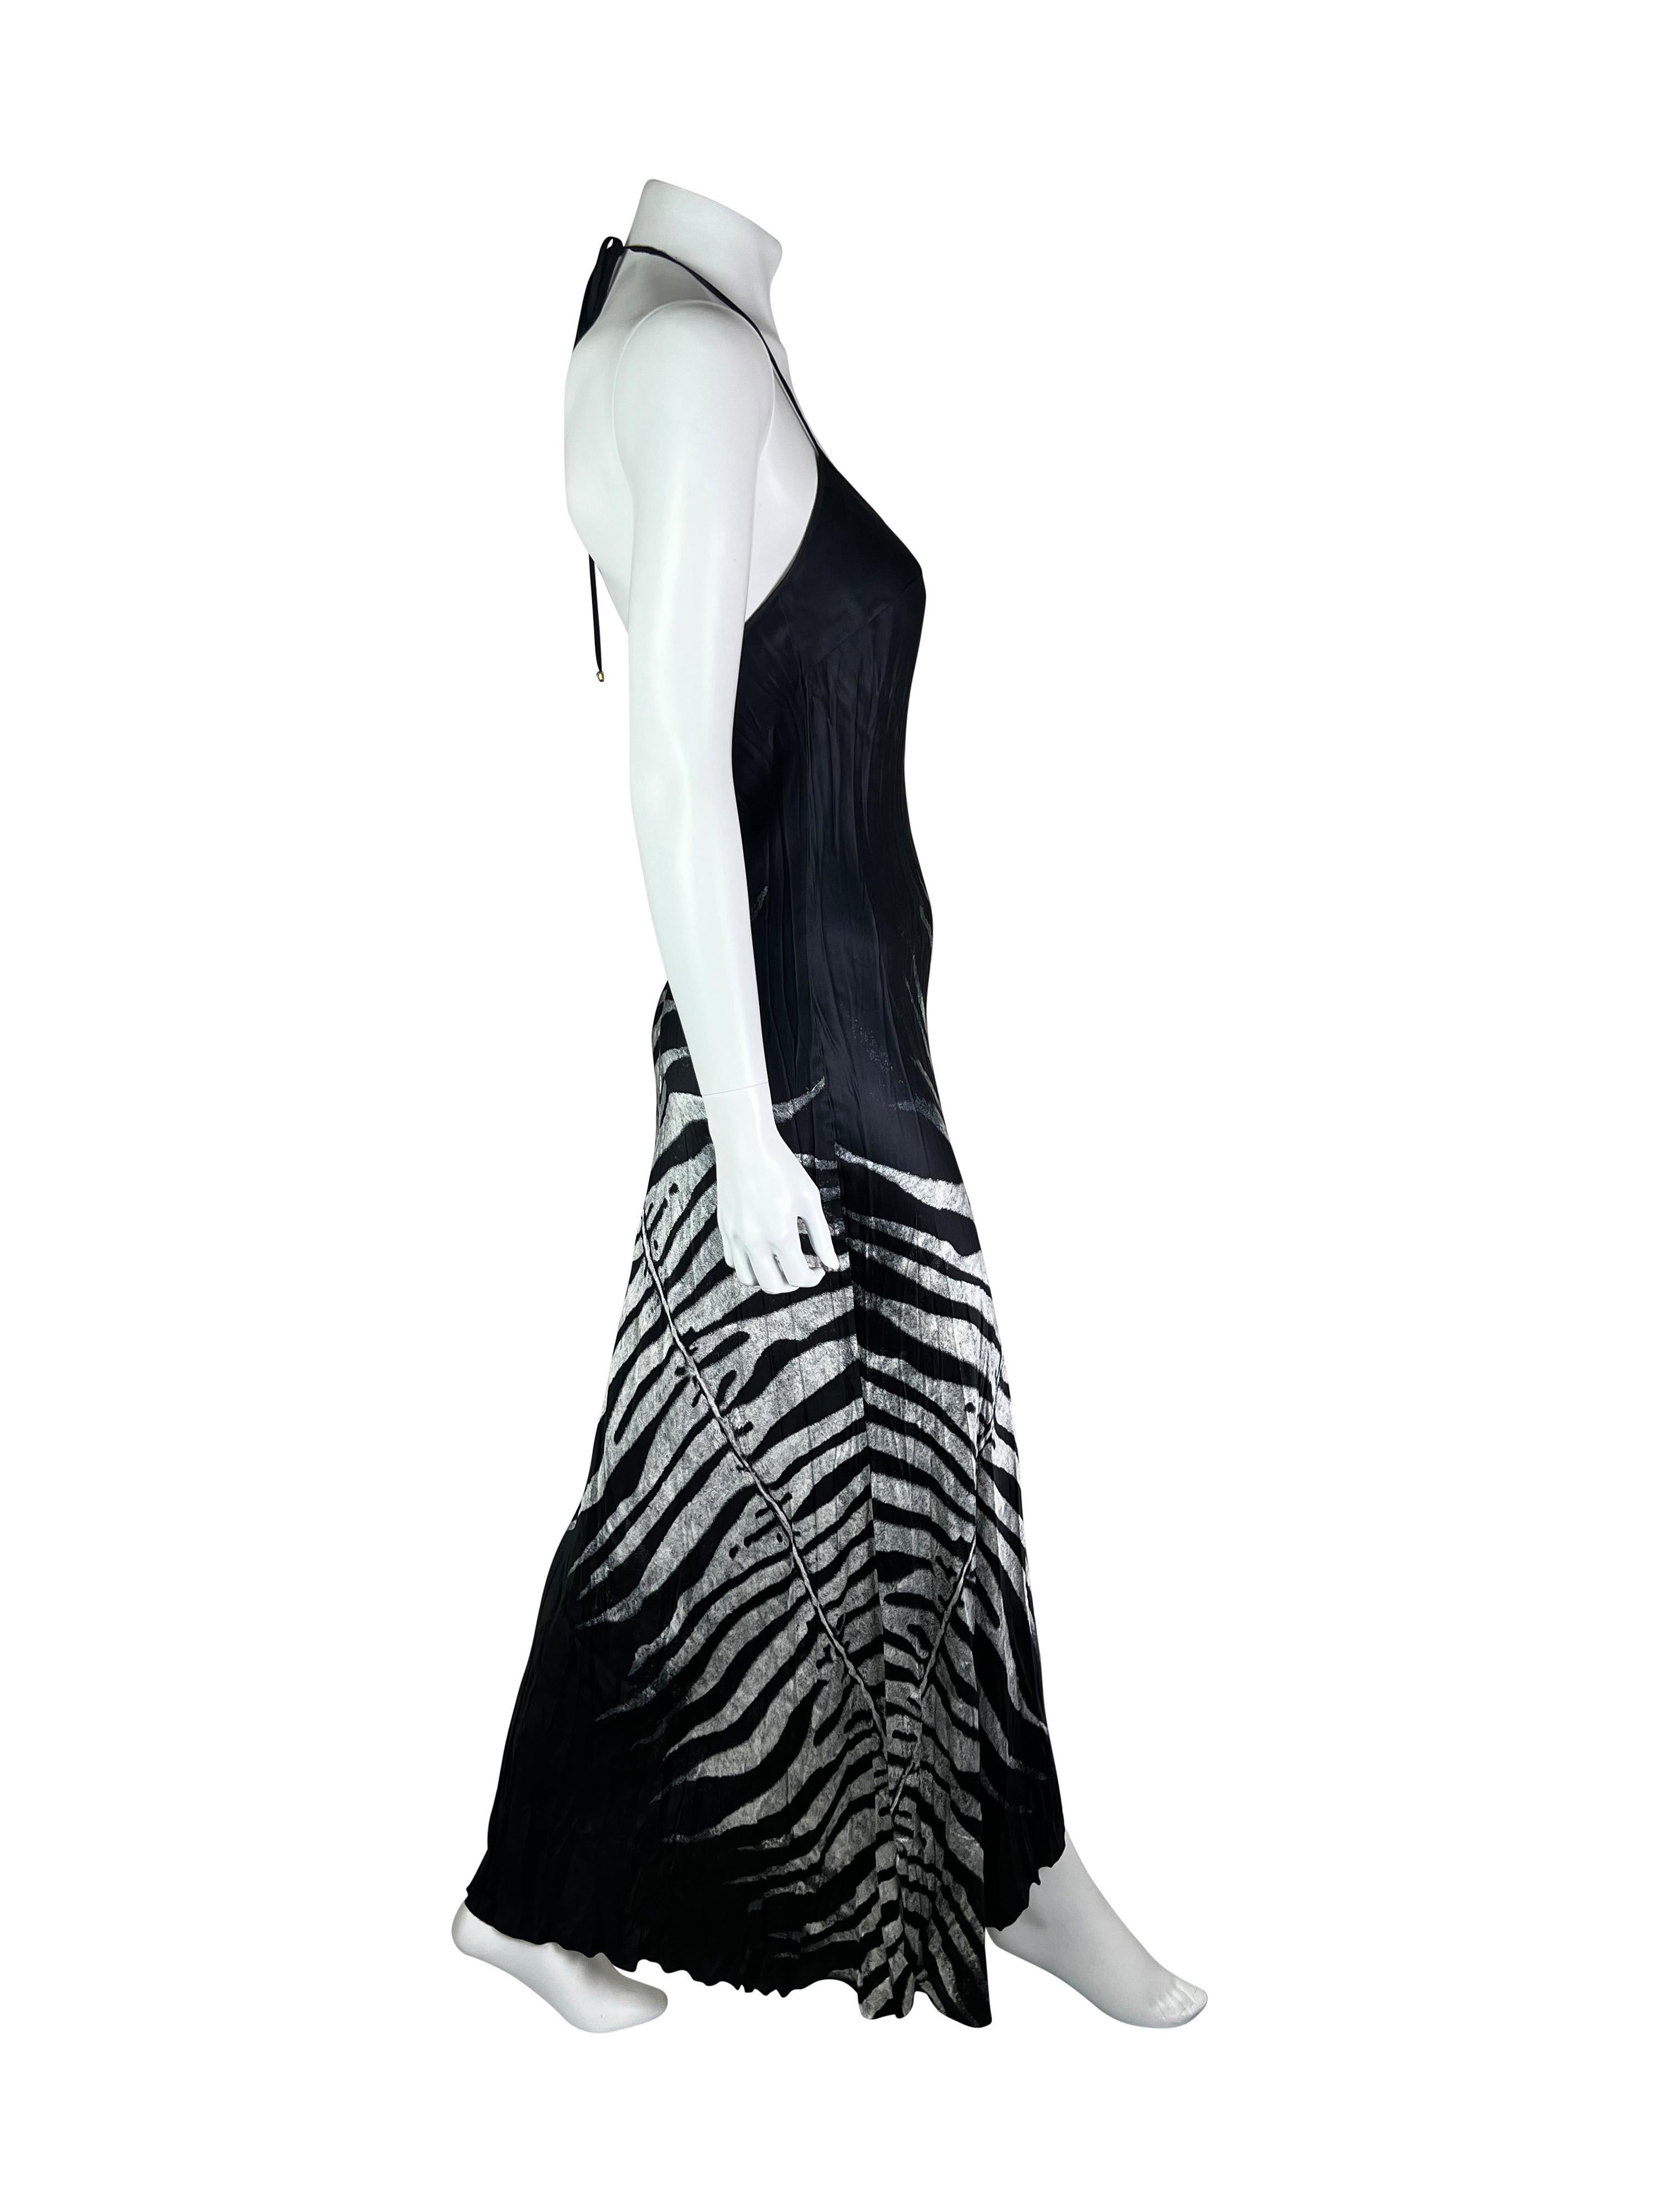 Roberto Cavalli Spring 2000 Crinkled Silk Dress In Excellent Condition For Sale In Prague, CZ